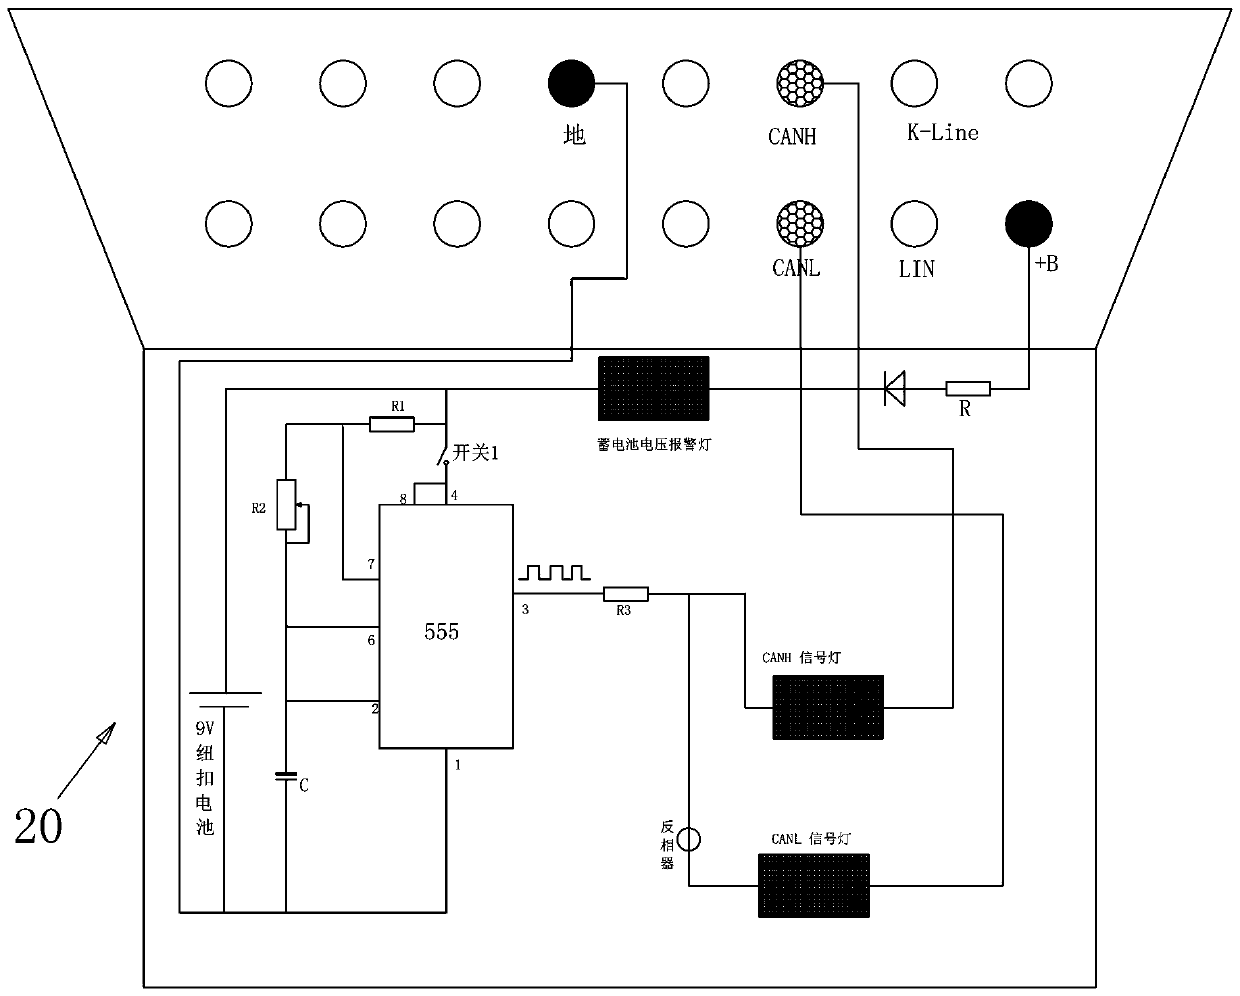 An automobile network signal detection method